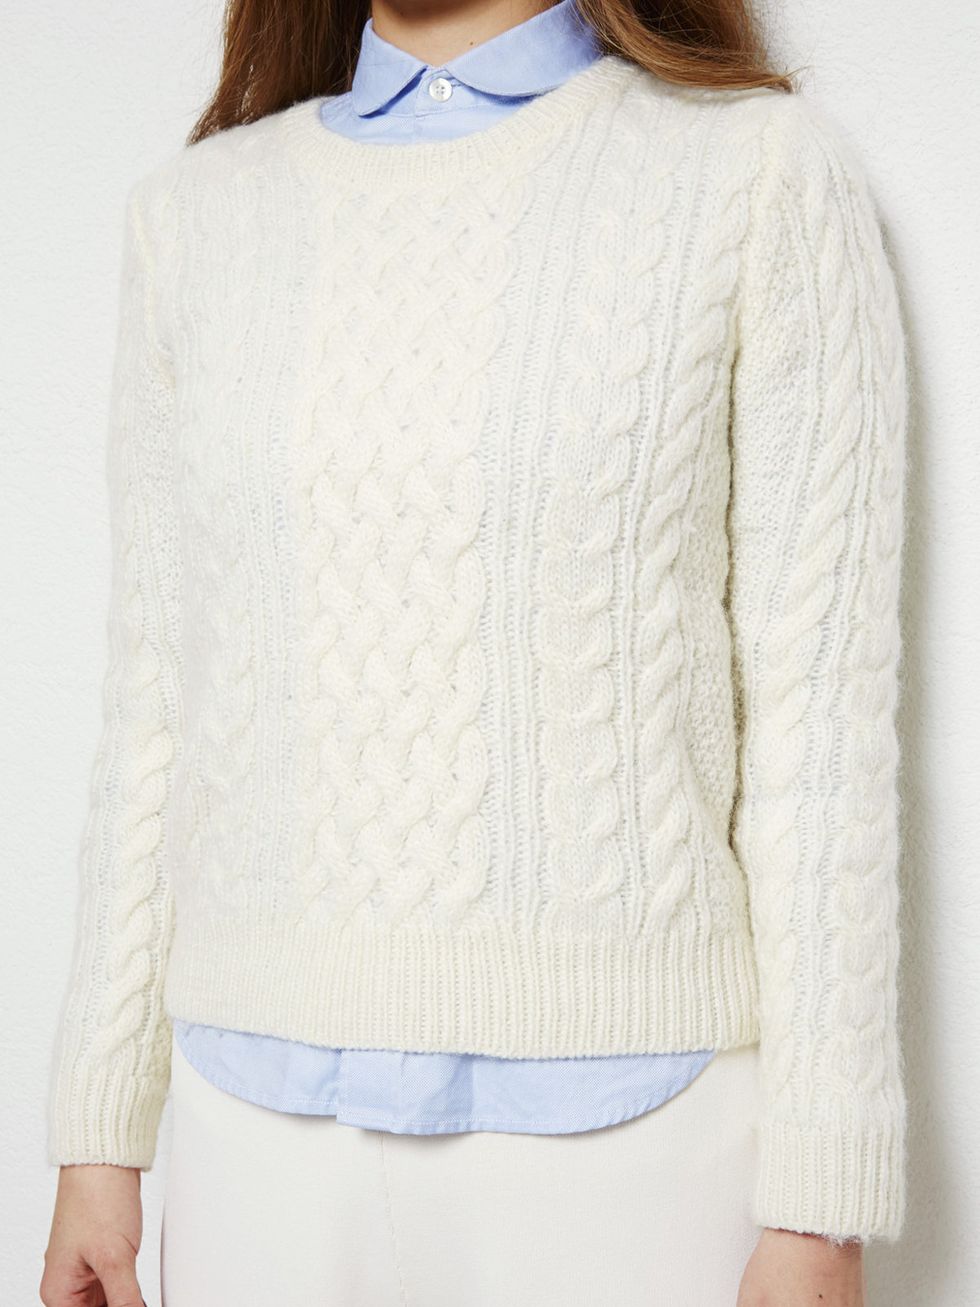 Clothing, Blue, Product, Sleeve, Shoulder, Textile, Joint, White, Sweater, Denim, 